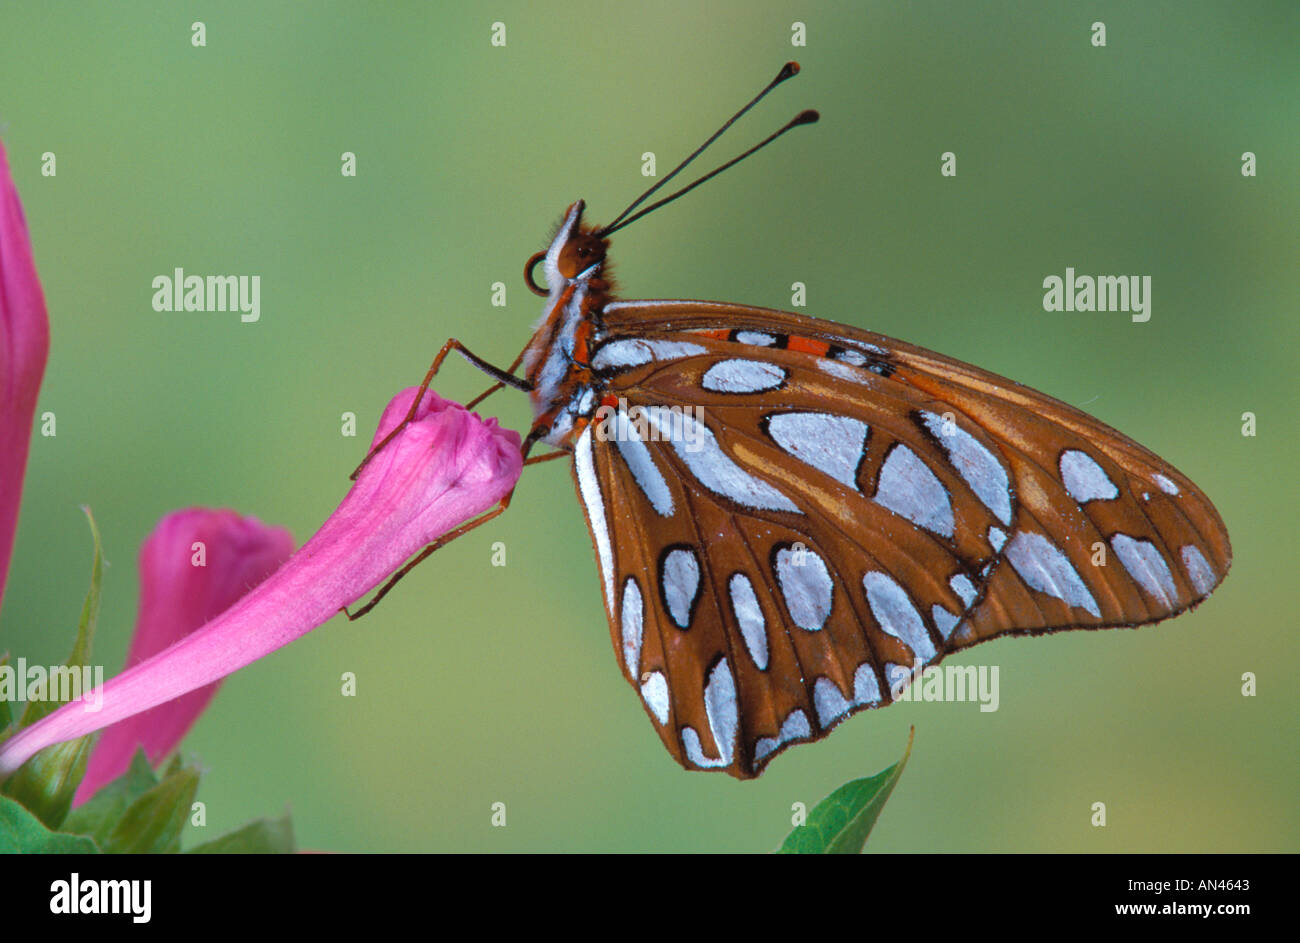 Gulf Fritillary Butterfly resting on flower Banque D'Images